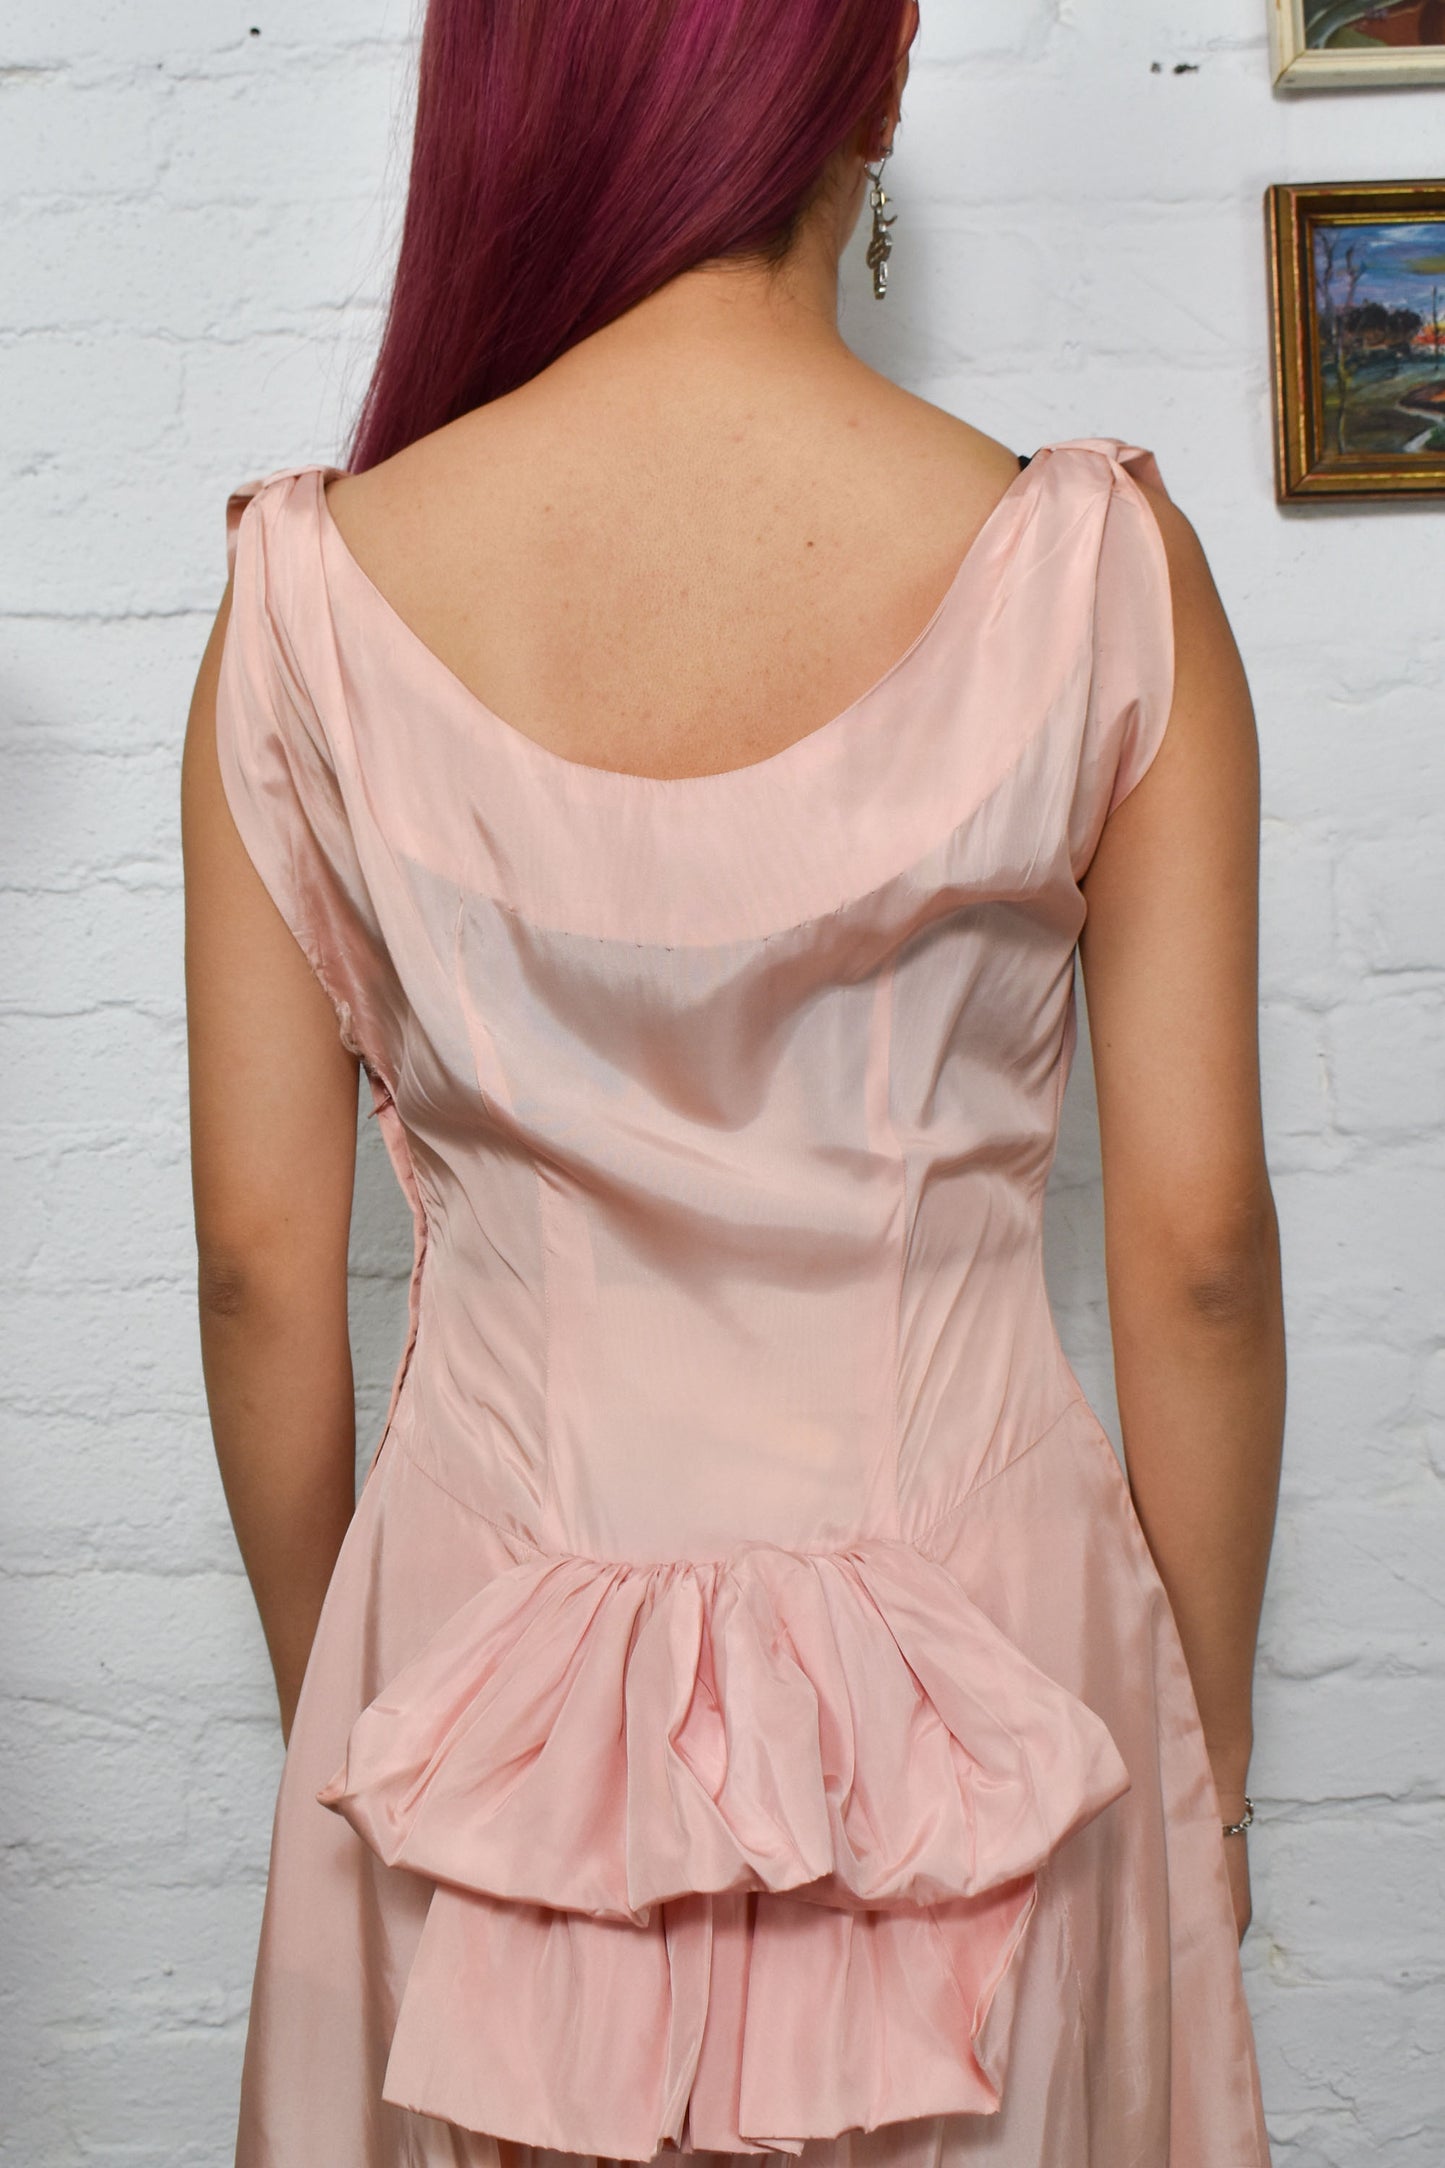 Vintage 50s Hand Made Pink Satin Long Gown